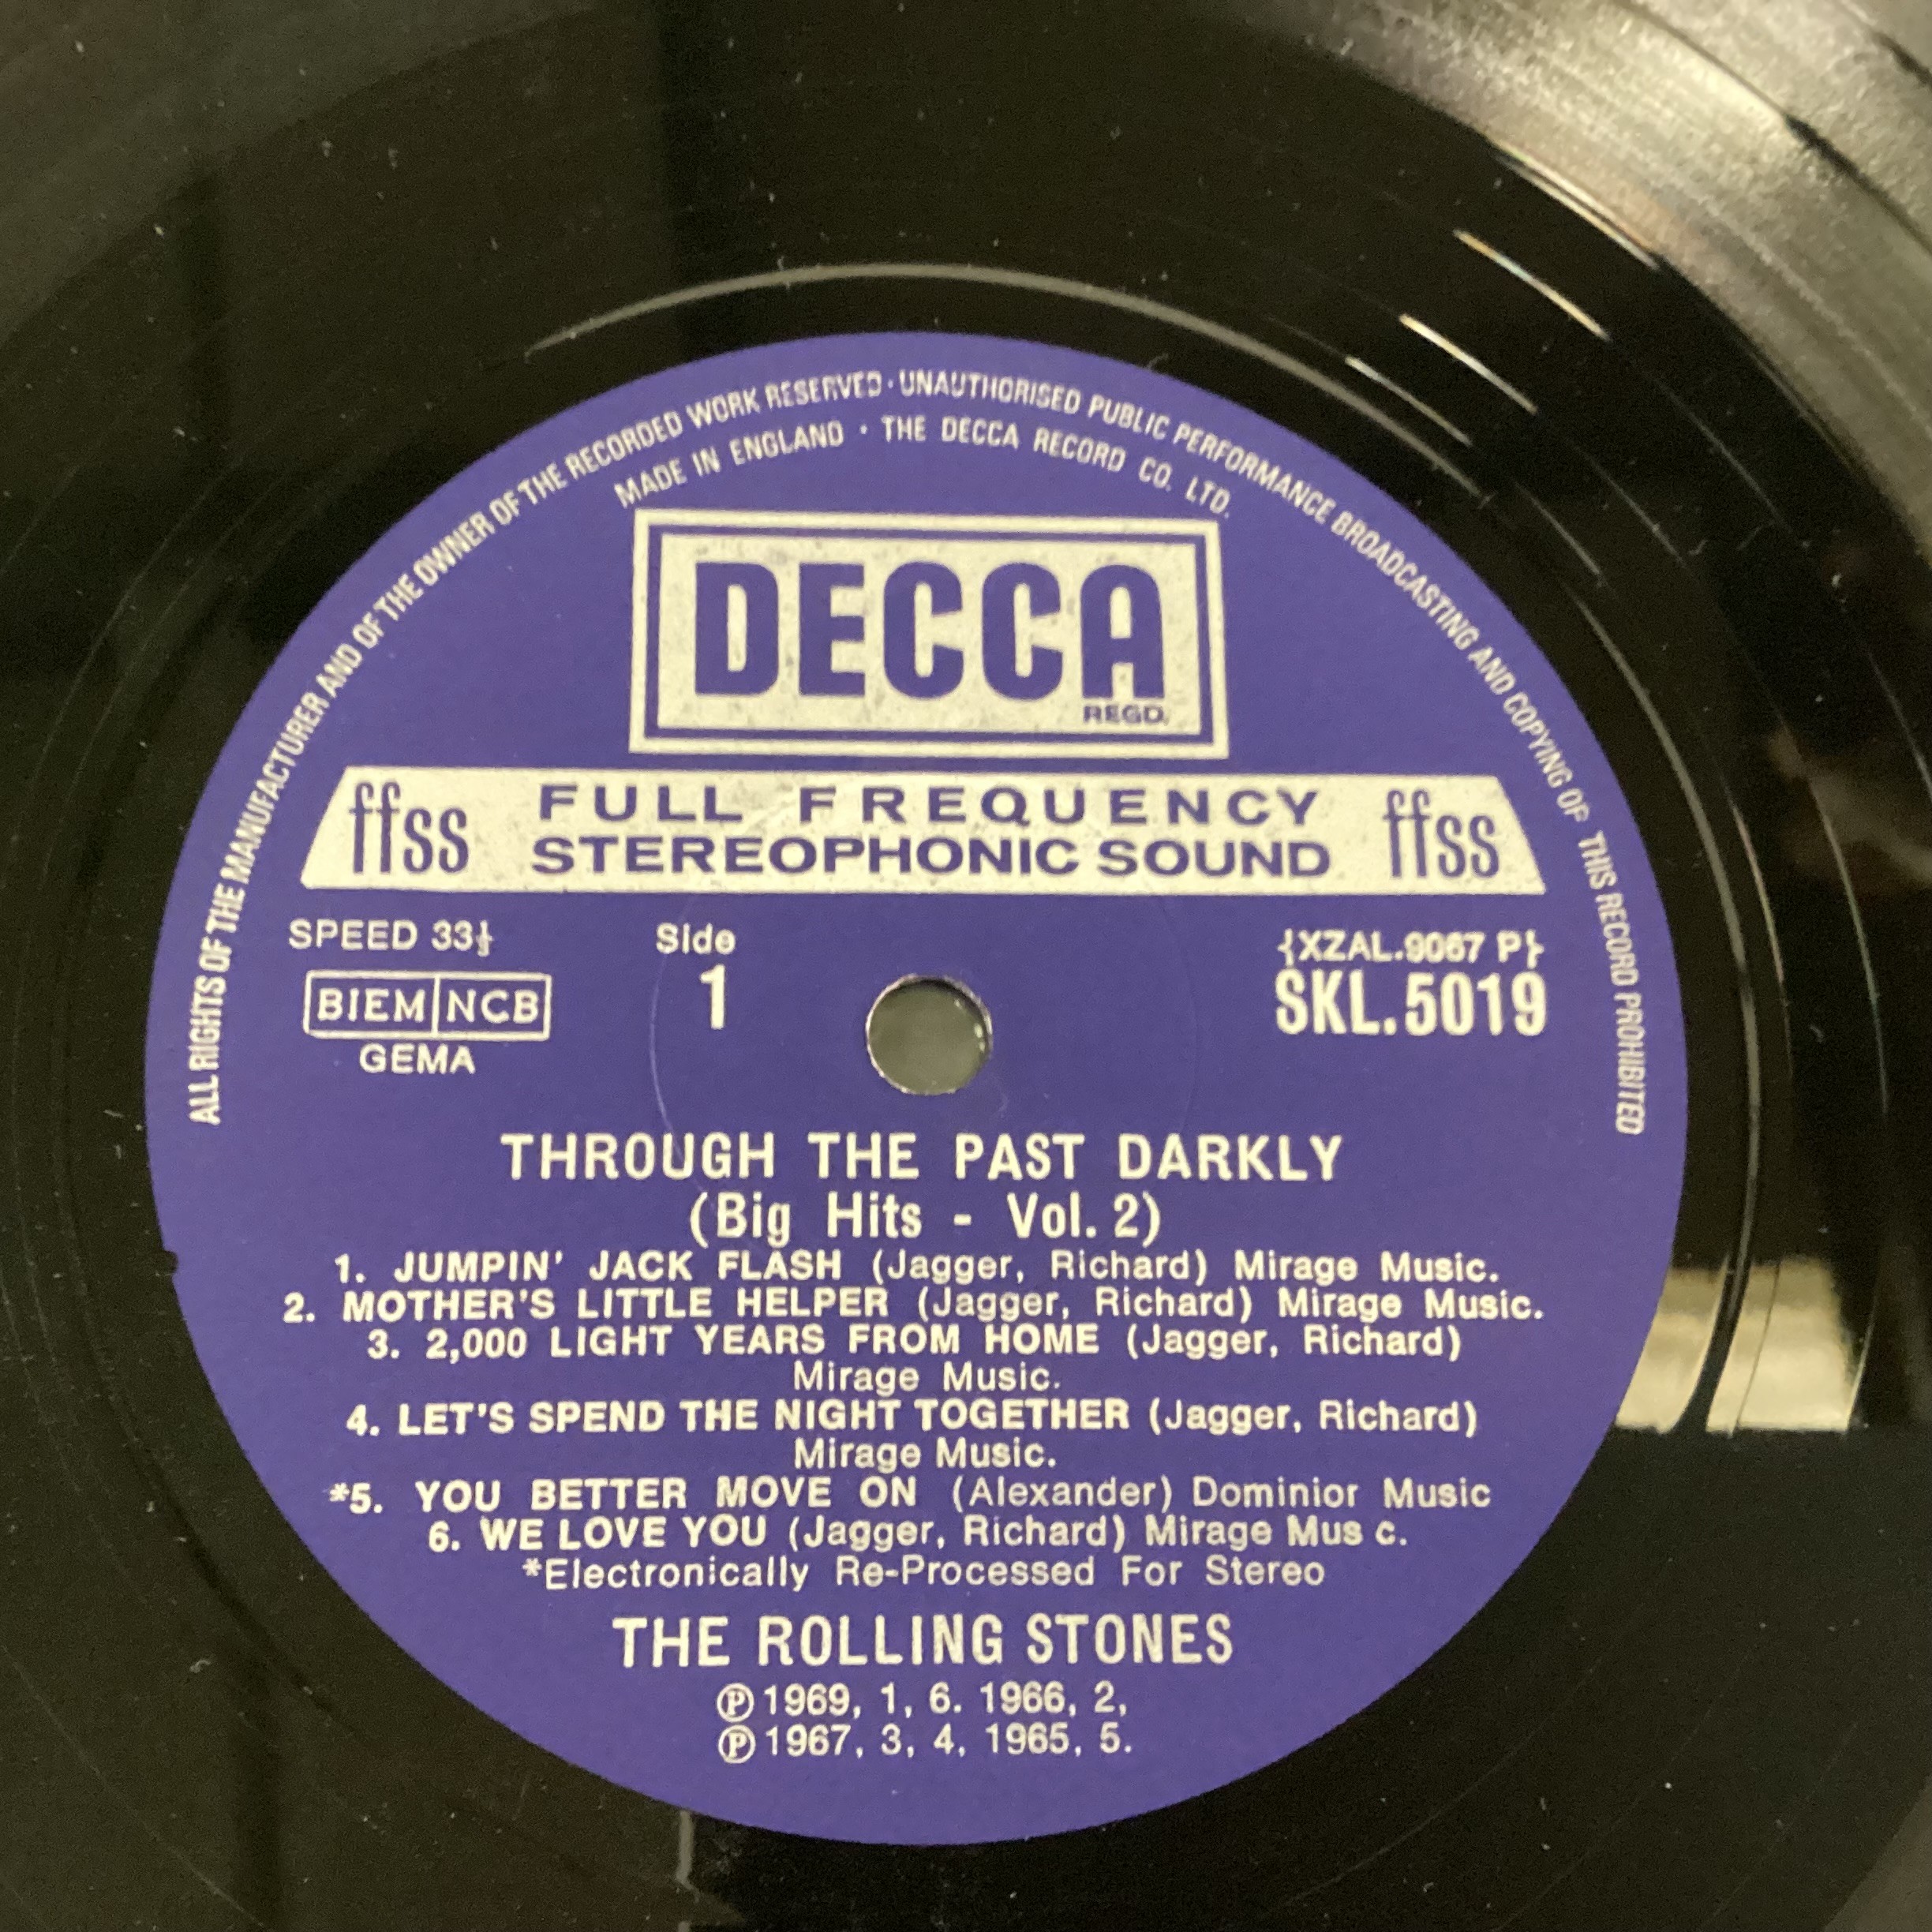 THE ROLLING STONES LP ‘THROUGH THE PAST DARKLY’. An Ex copy of this Stereo album on Decca SKL 5019 - Image 3 of 4